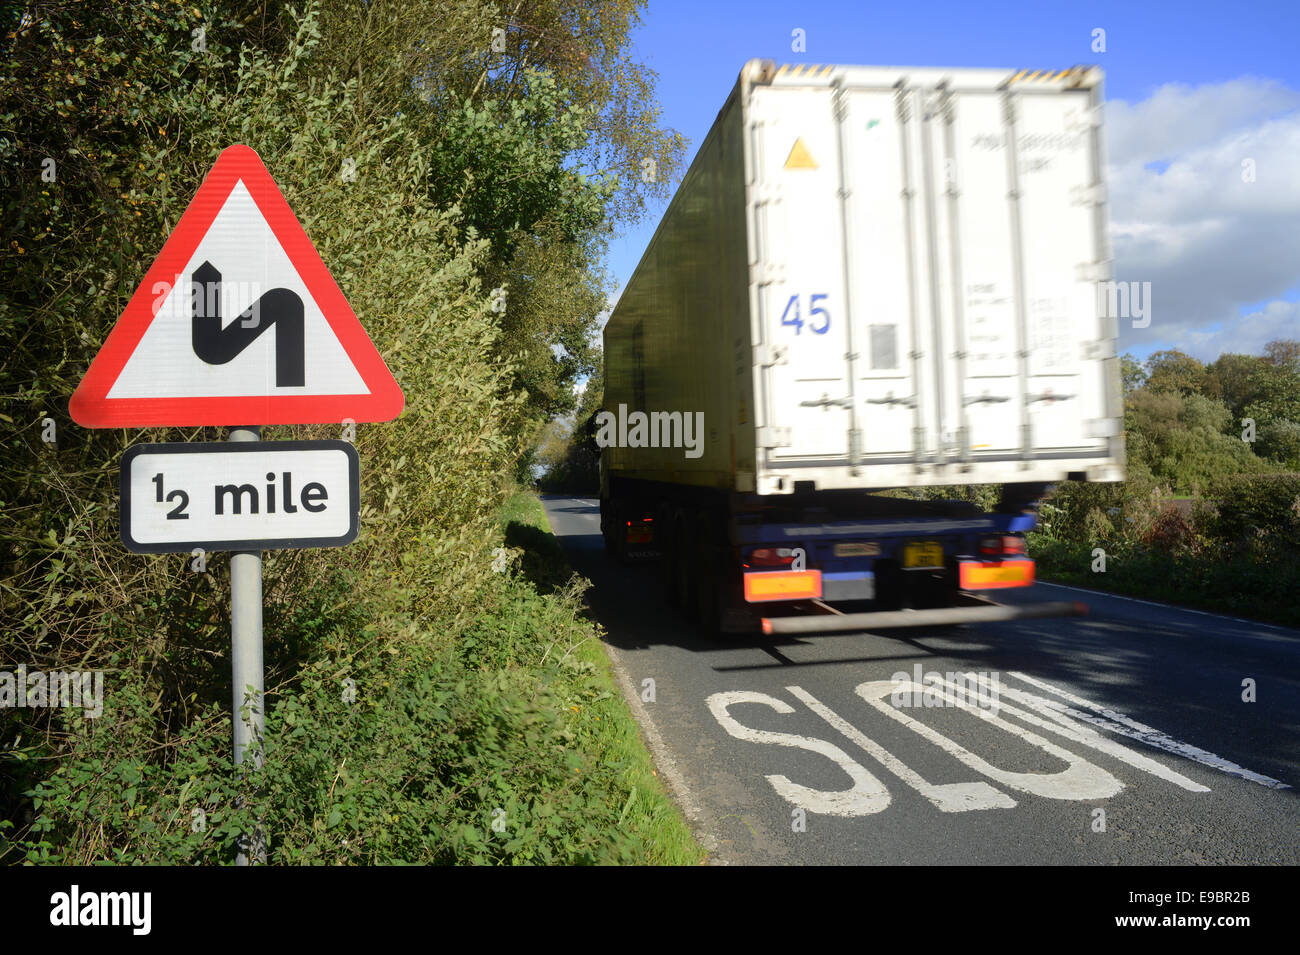 lorry passing sharp bend warning sign for half a mile ahead yorkshire united kingdom Stock Photo